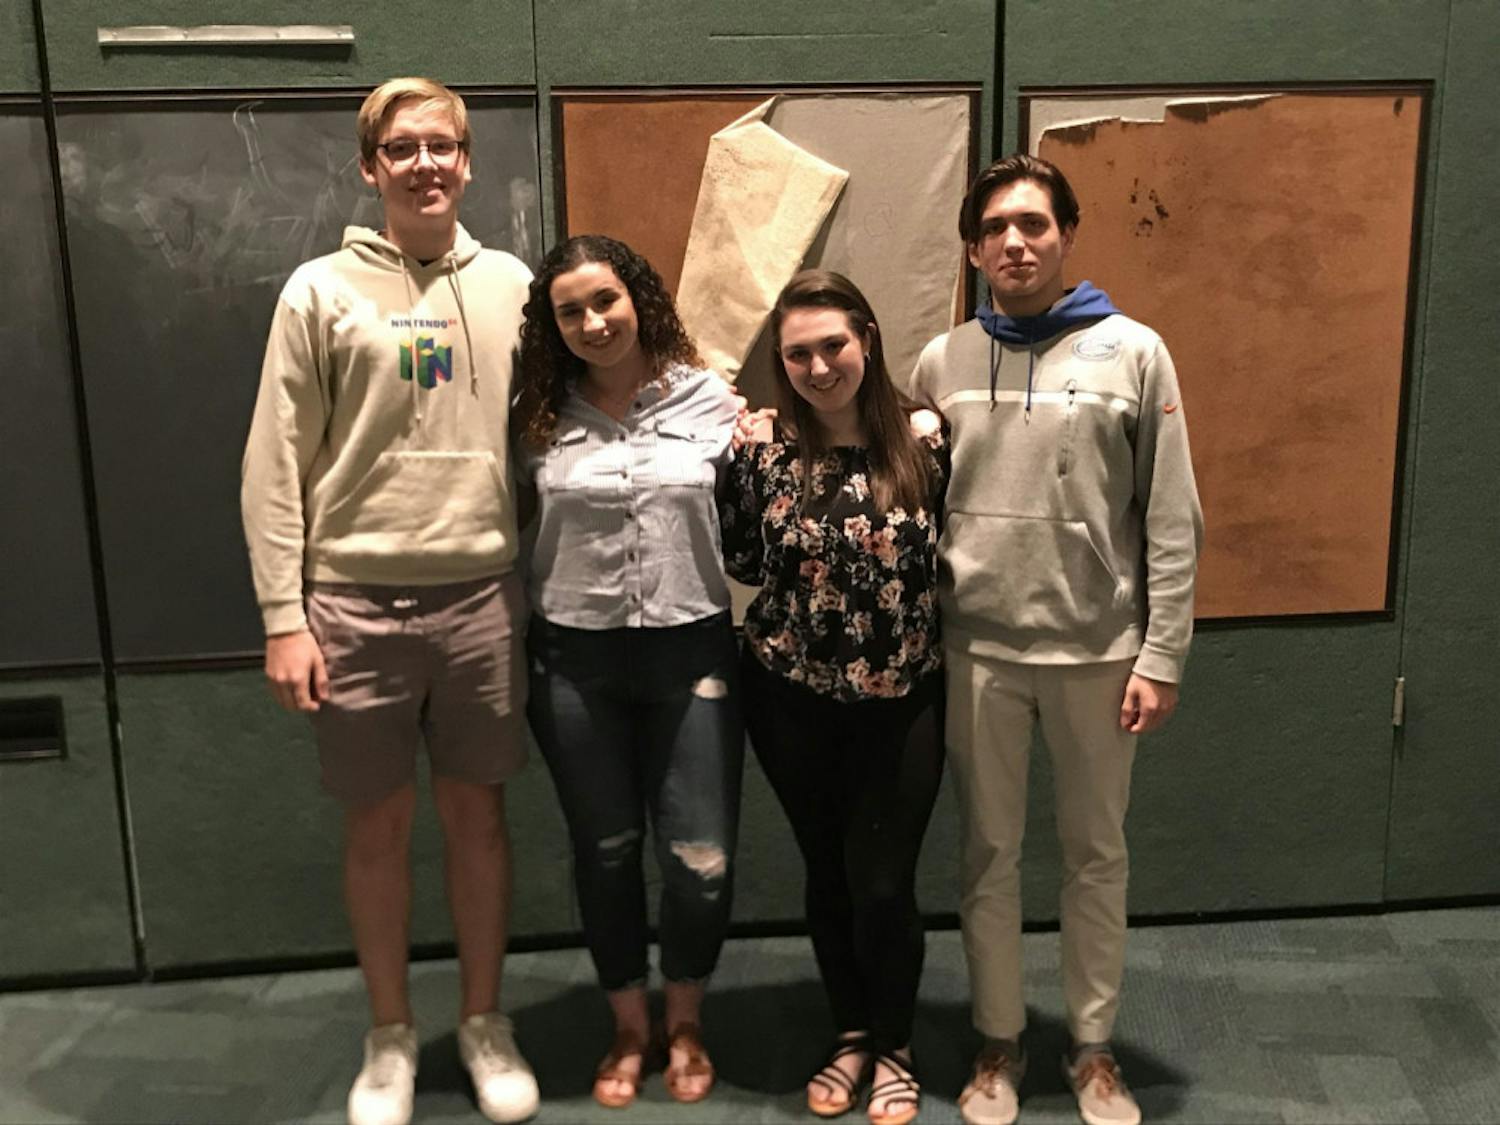 Eastside High School students James Donnelly (left), Carly Rubin, Camille Eyman and Graham Louis (right) will be performing and competing as the district representative for district 12.